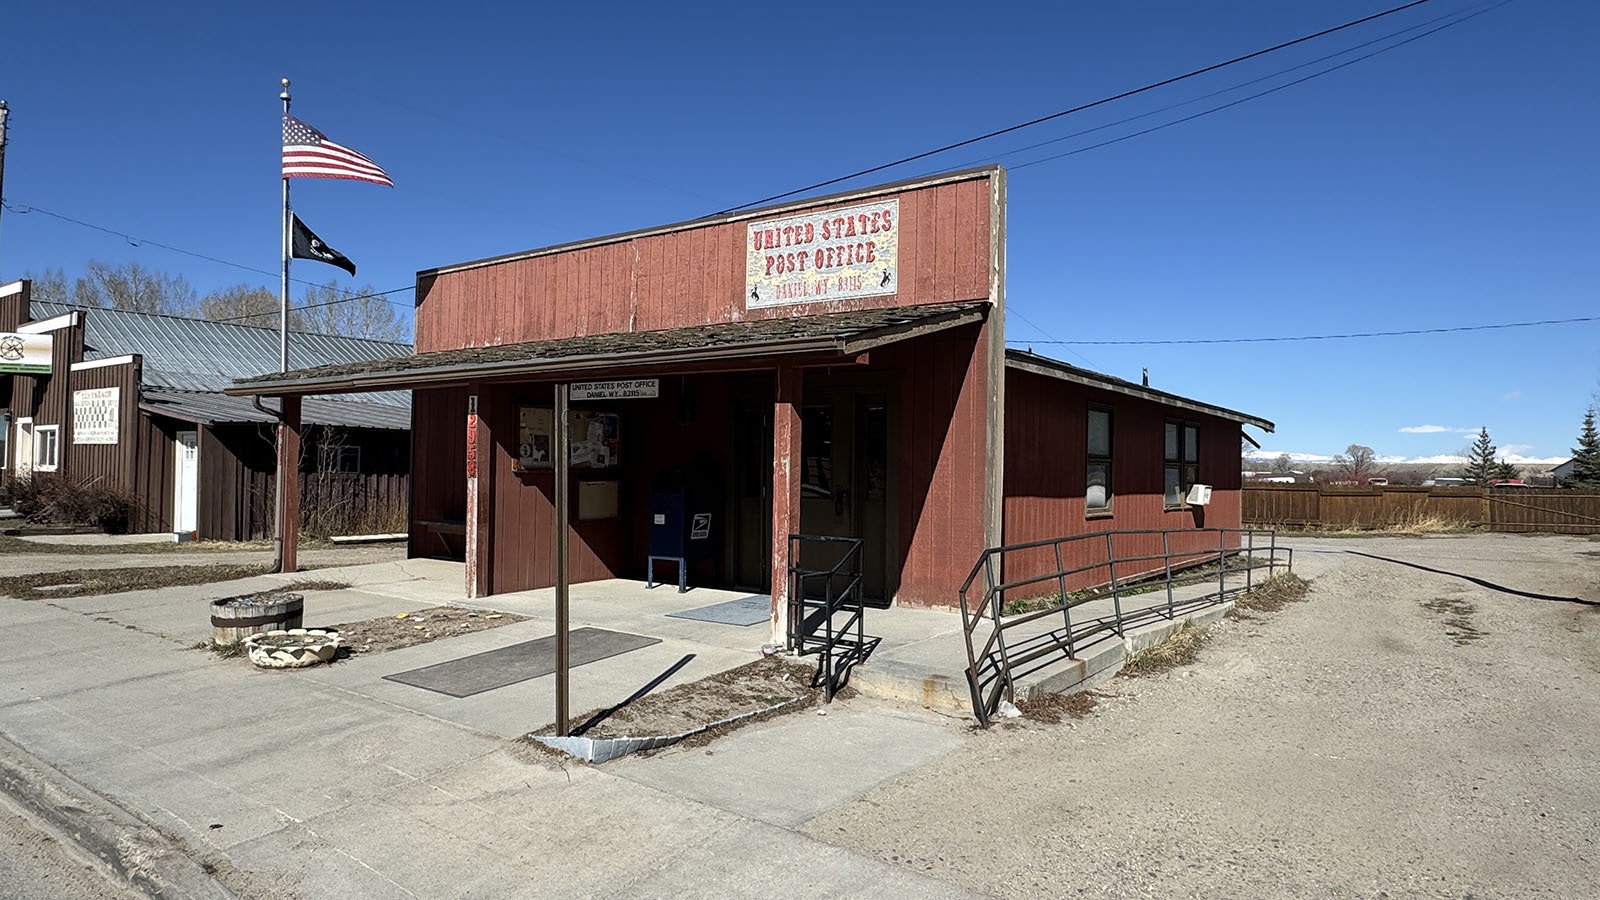 The Daniel, Wyoming, Post Office.